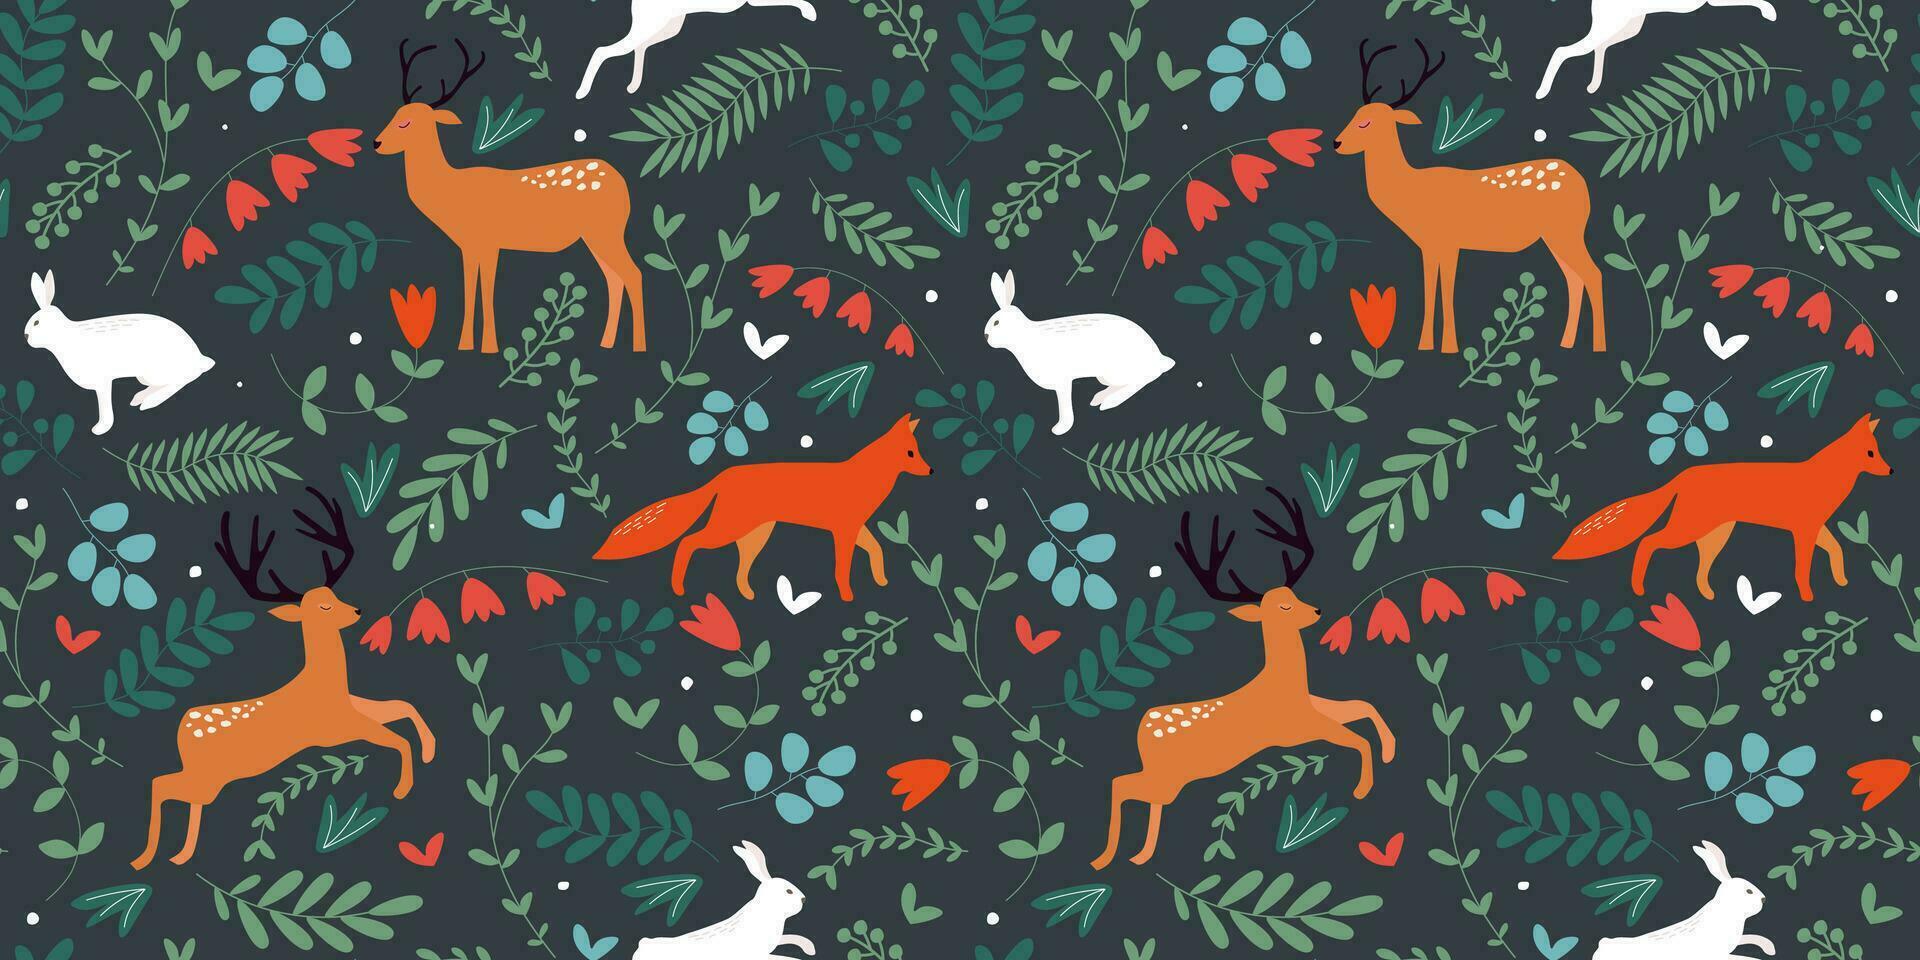 Seamless pattern with forest animals, plants, leaves, flowers. Natural print with foxes, deer, hares. Vector graphics.